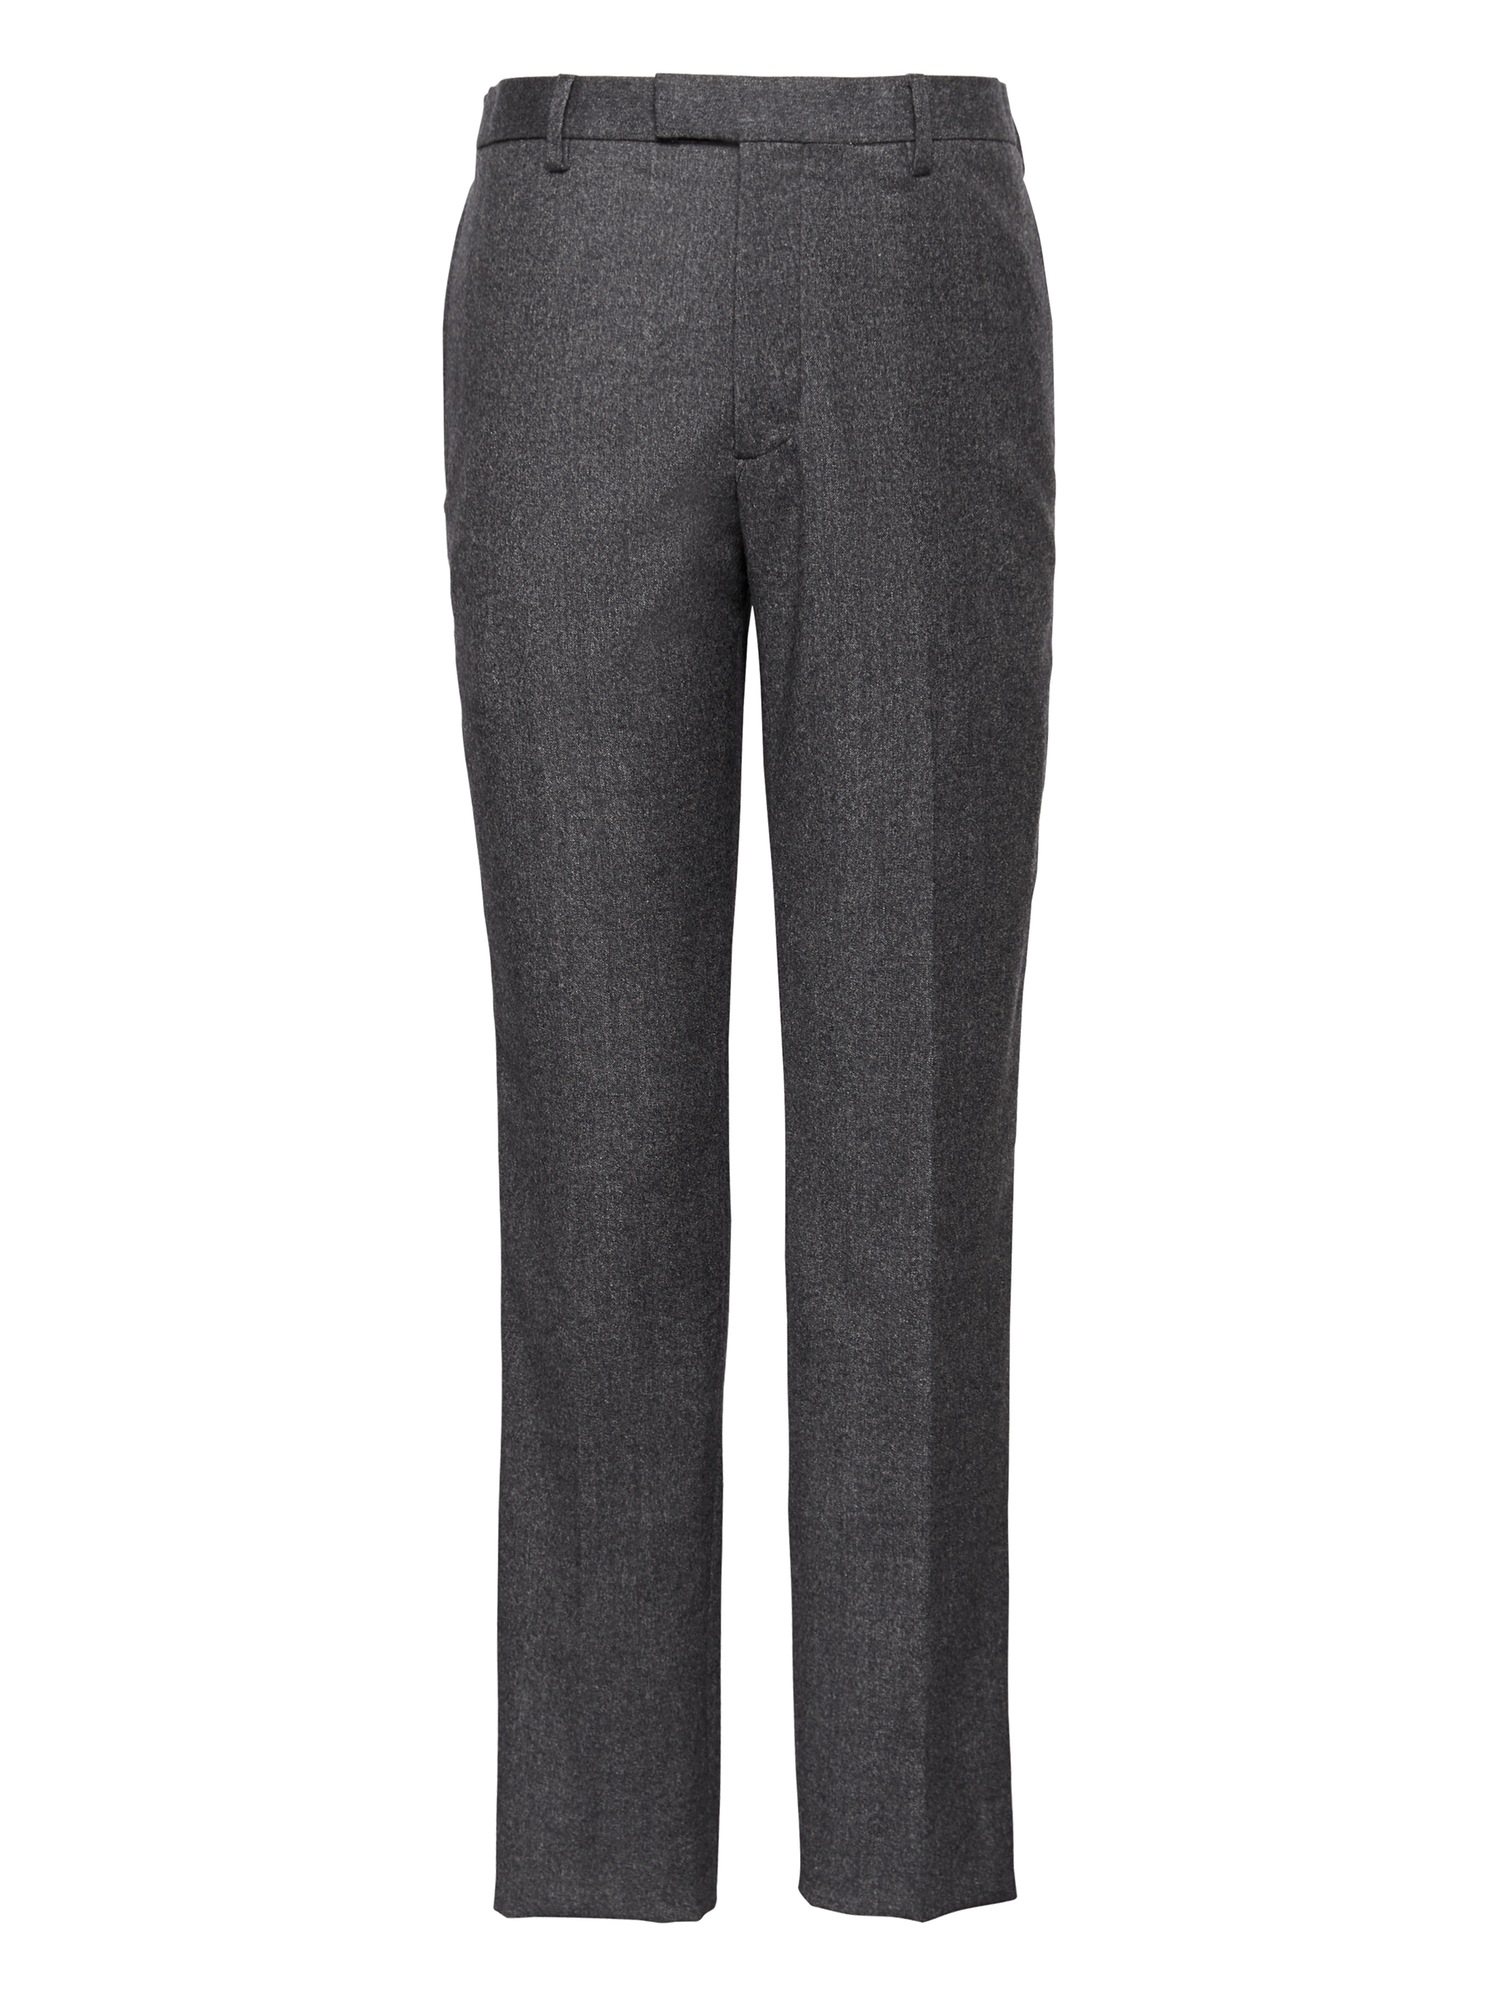 Athletic Tapered Flannel Dress Pant